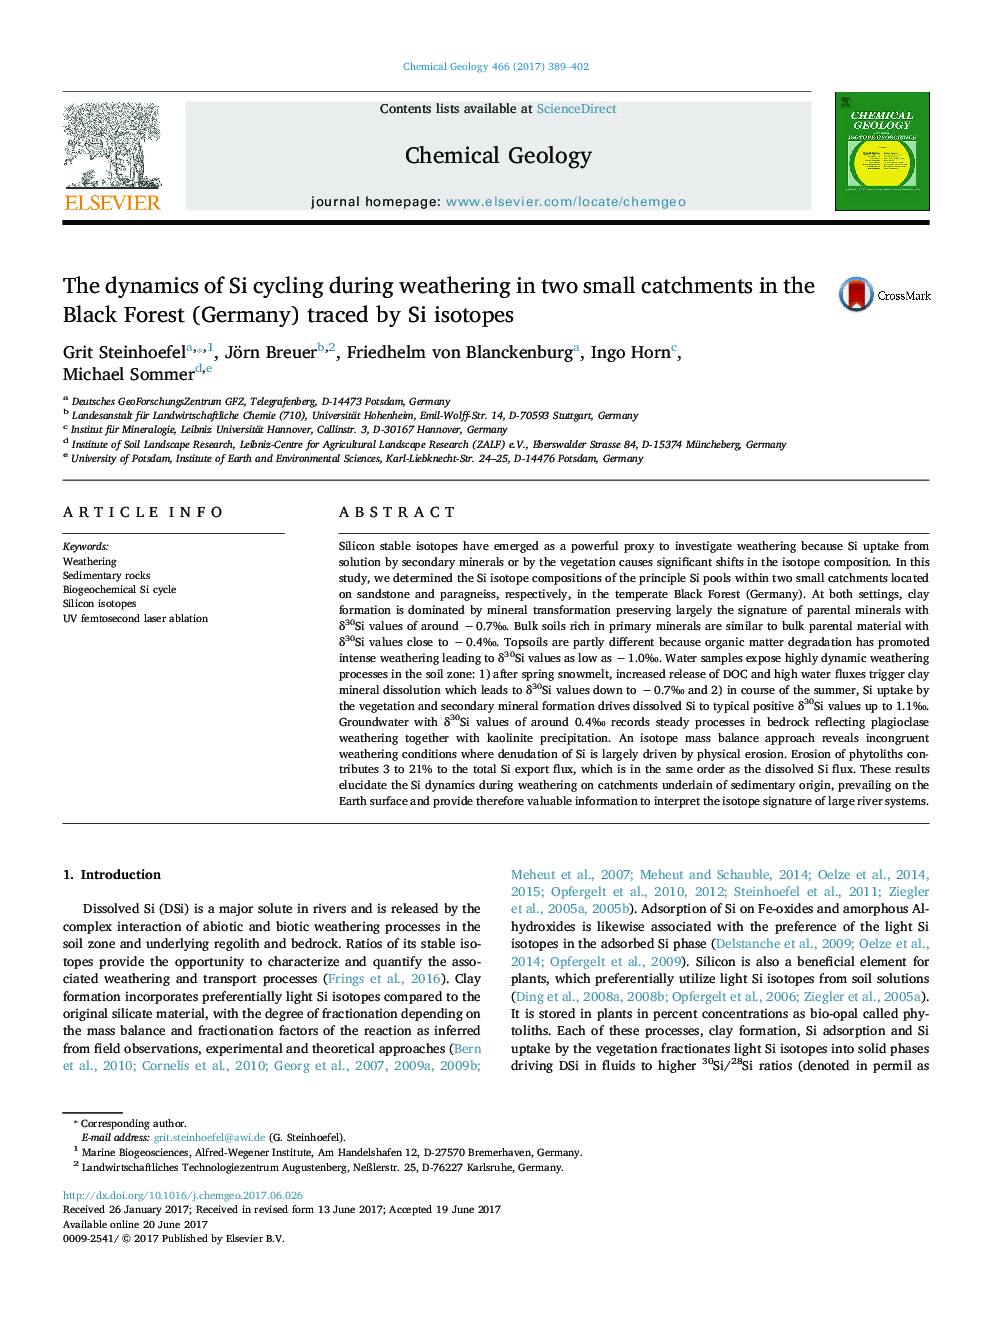 The dynamics of Si cycling during weathering in two small catchments in the Black Forest (Germany) traced by Si isotopes